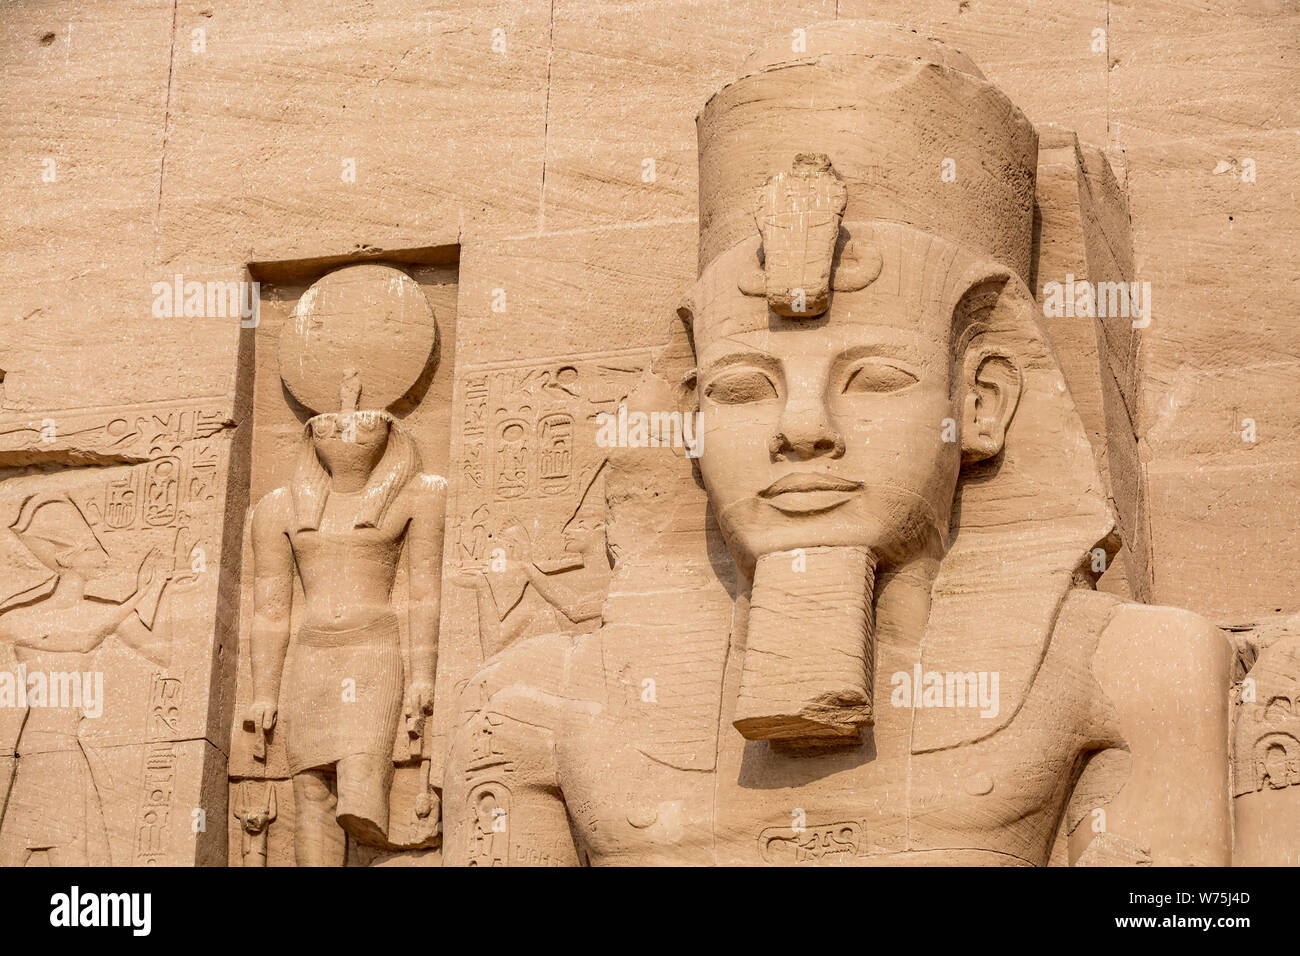 Statue of Ramesses the Great, Abu Simbel temple, Egypt Stock Photo